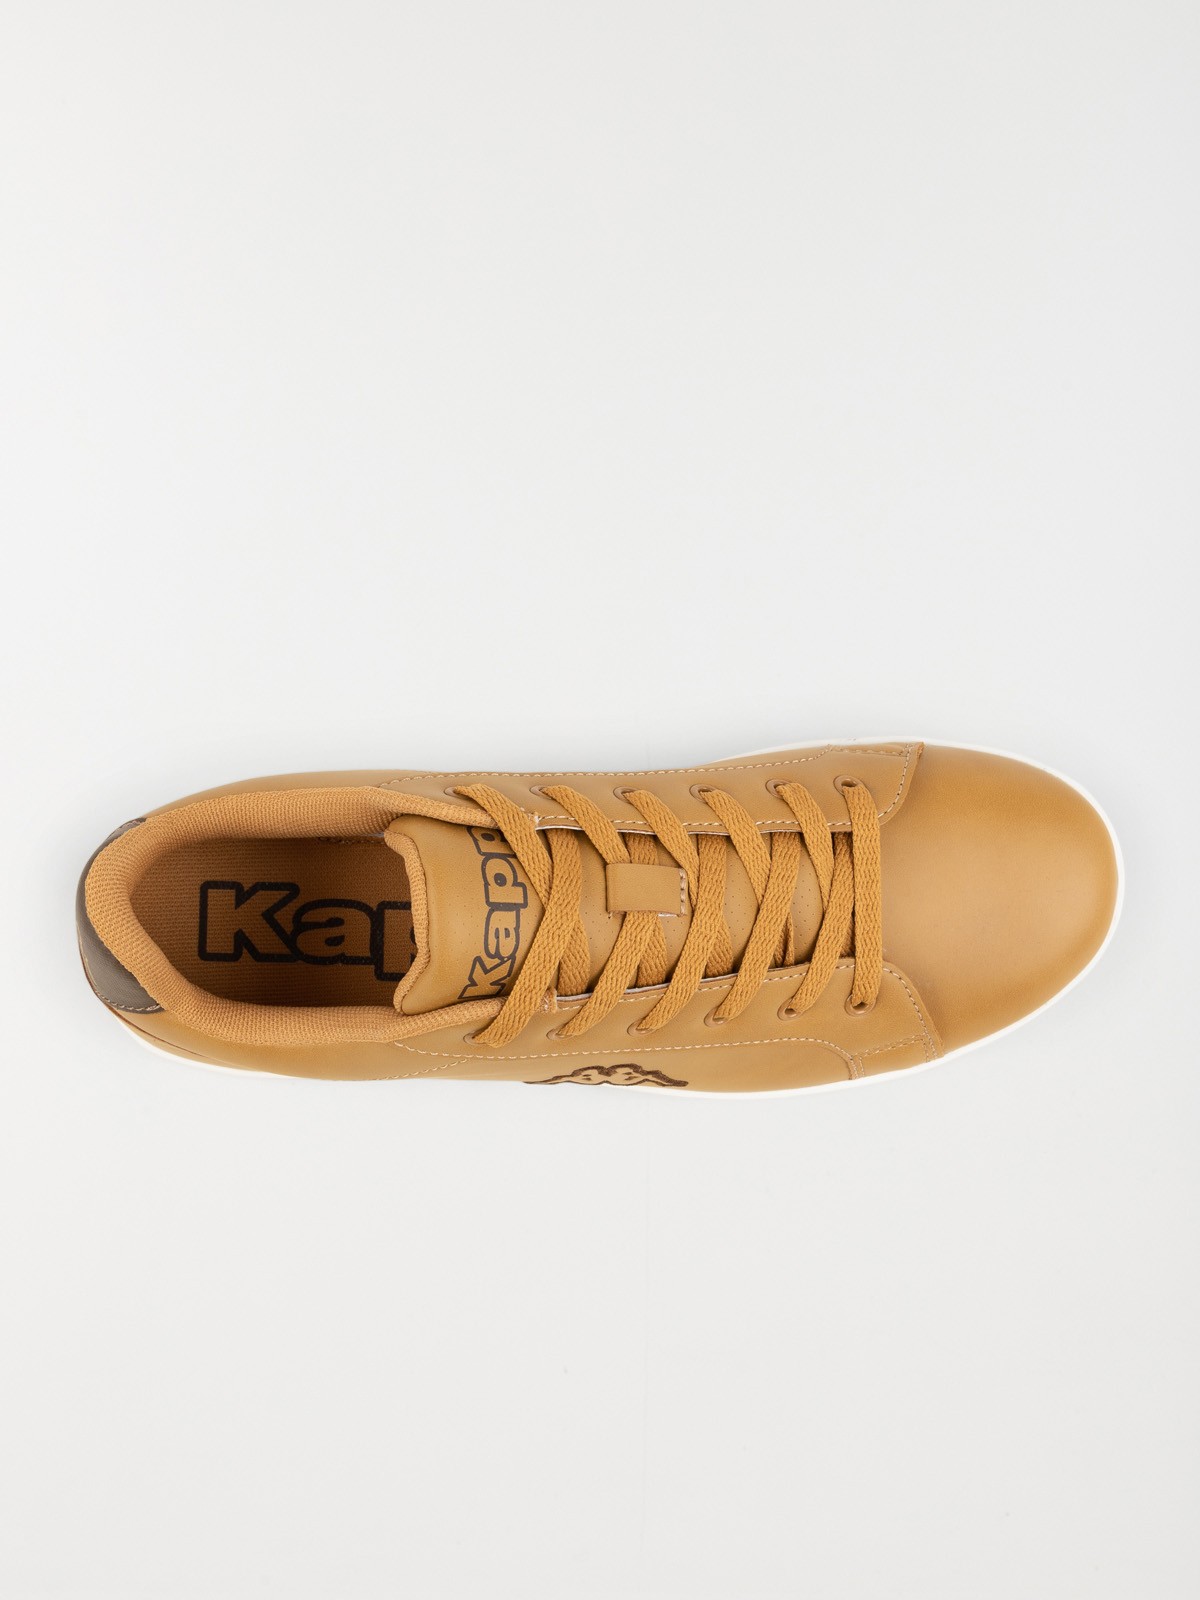 Chaussures KAPPA tan homme (40-46) - DistriCenter